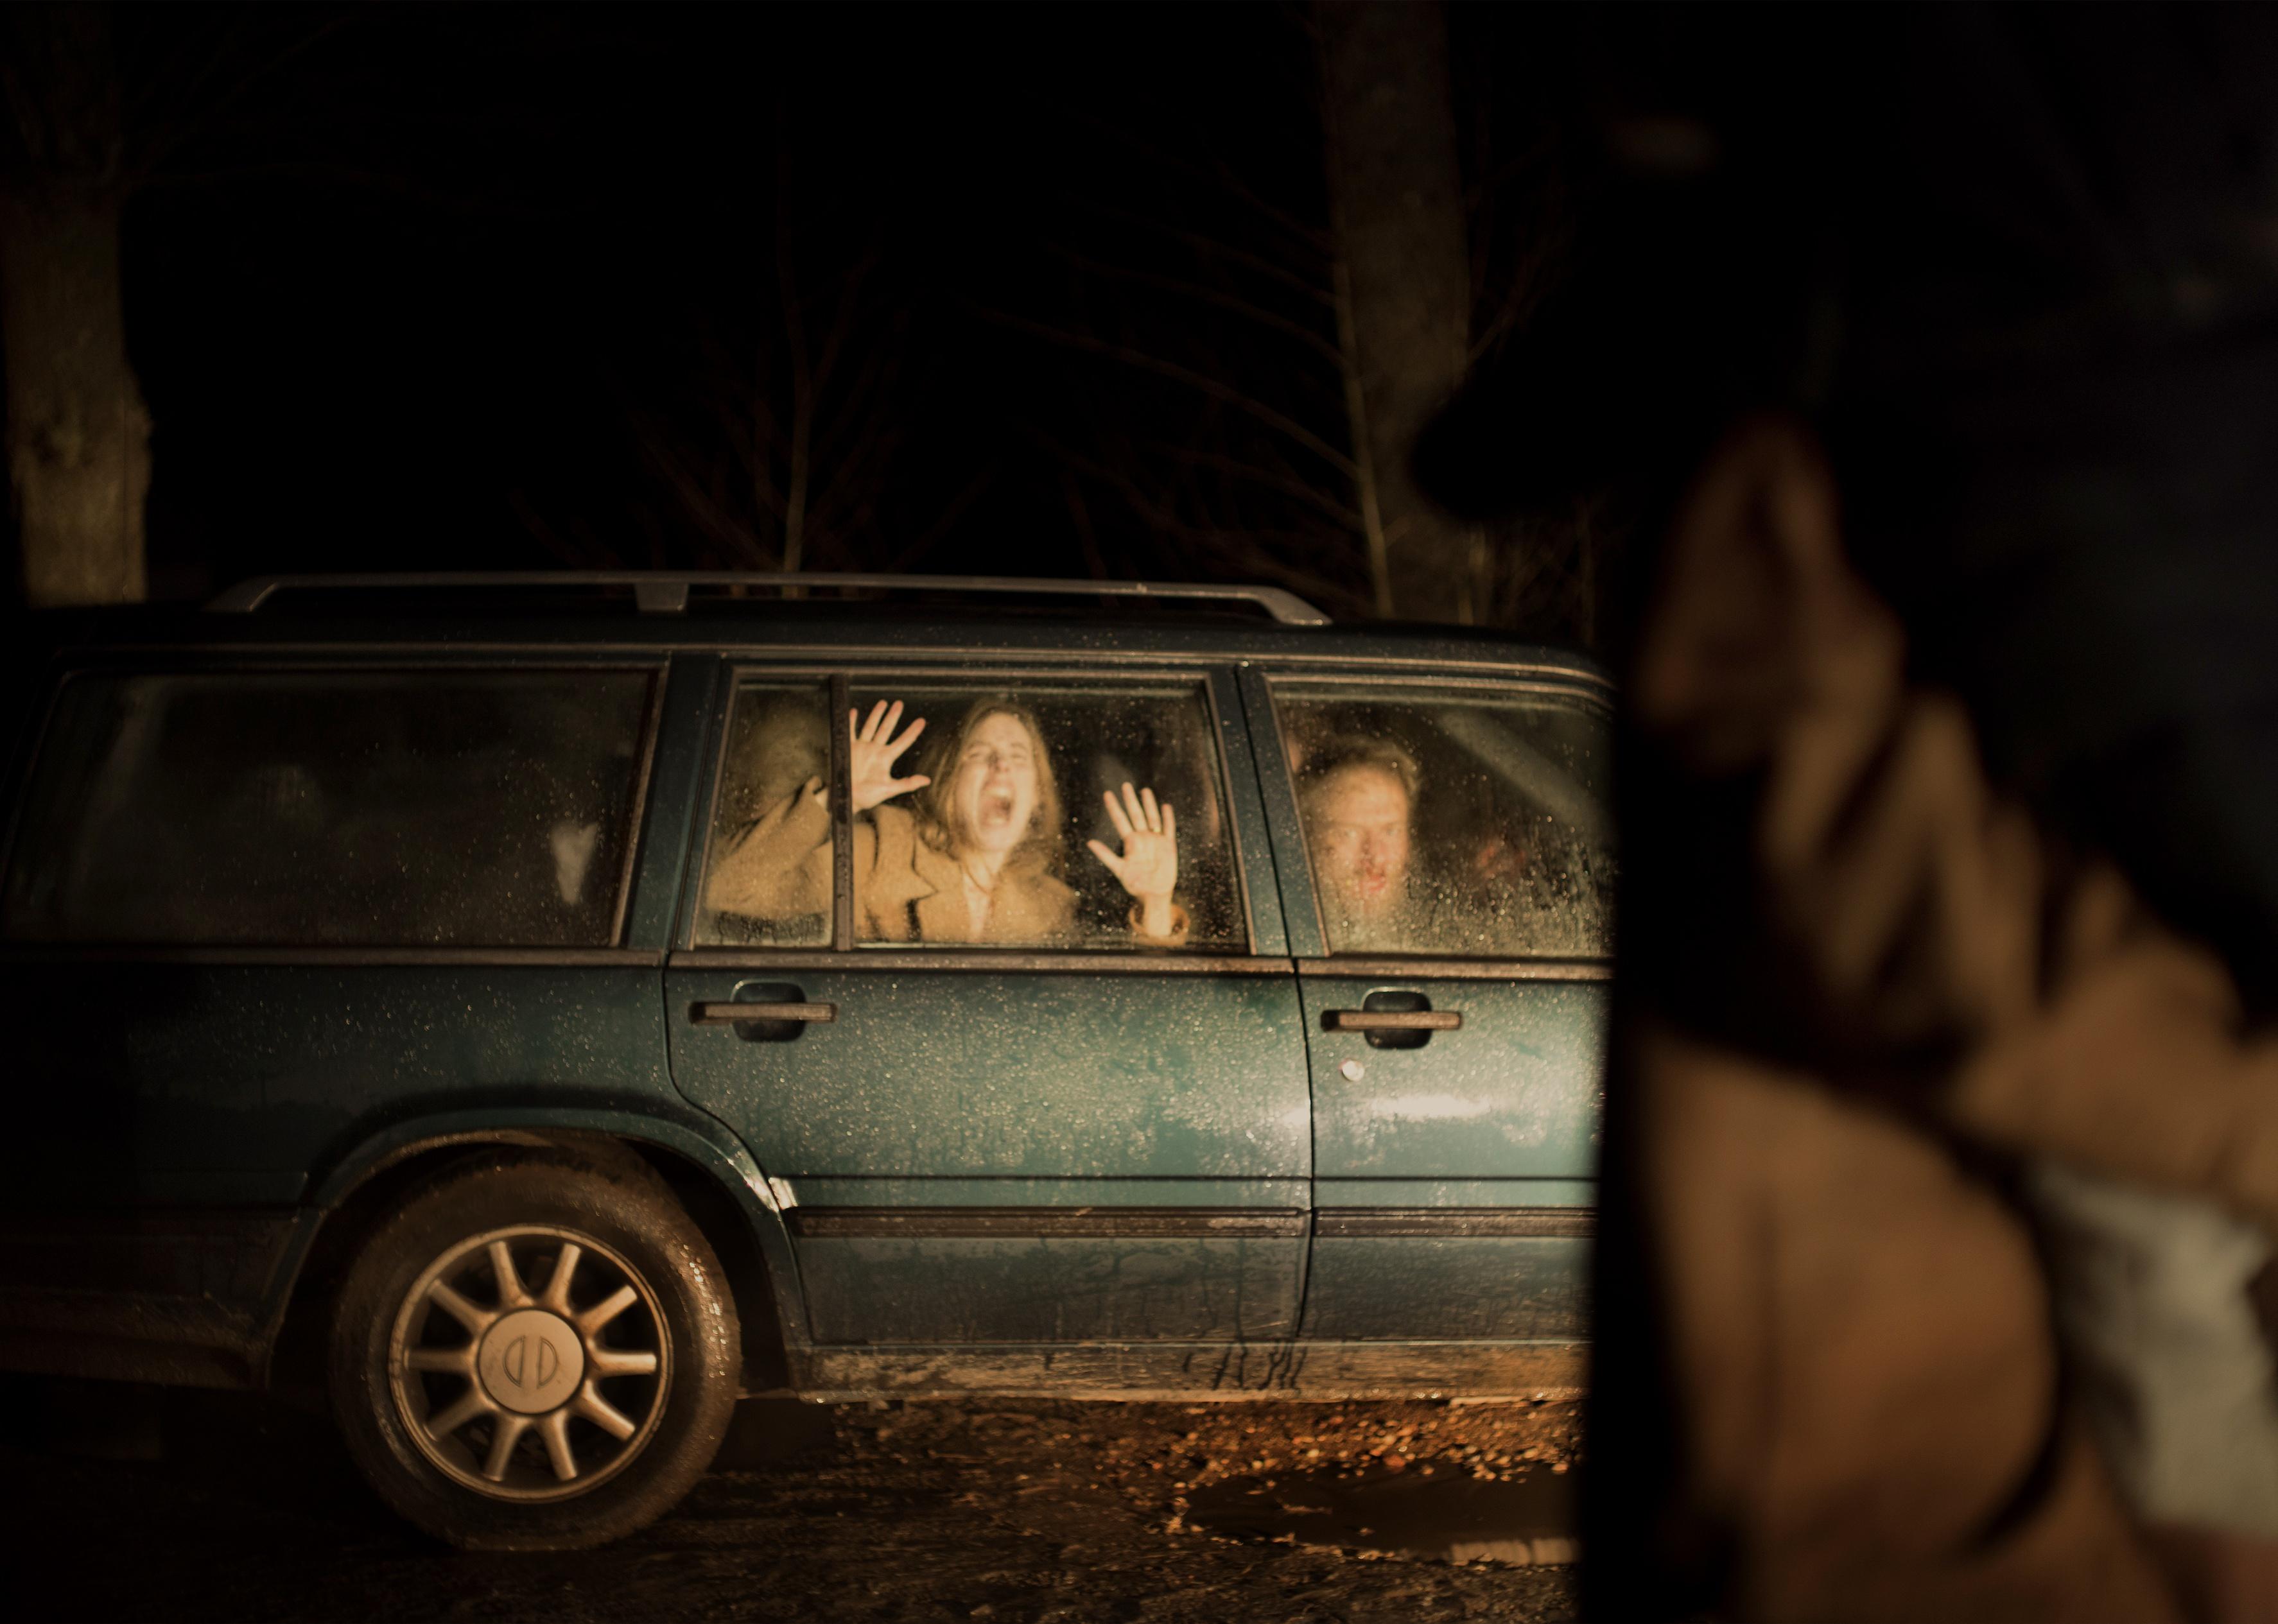 People screaming in horror in a volvo wagon